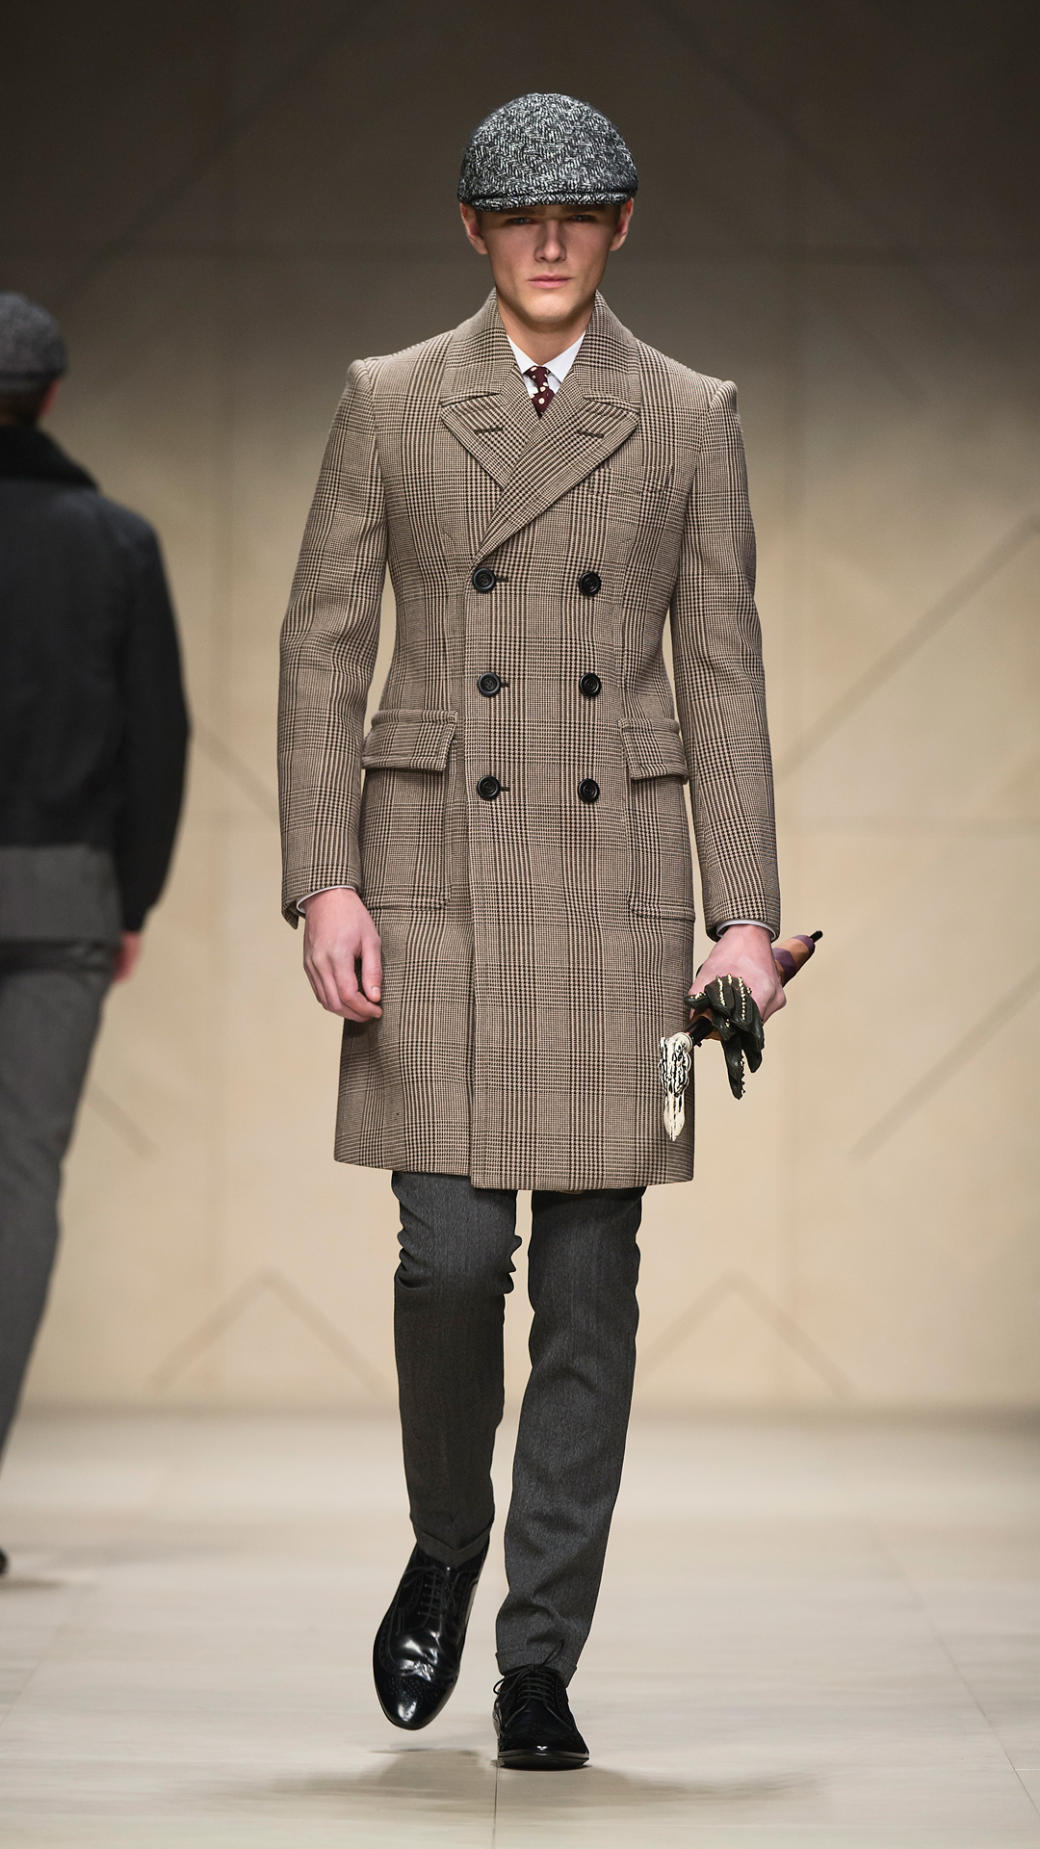 Lyst - Burberry Prorsum Wool Tailored Chesterfield Coat in Natural for Men